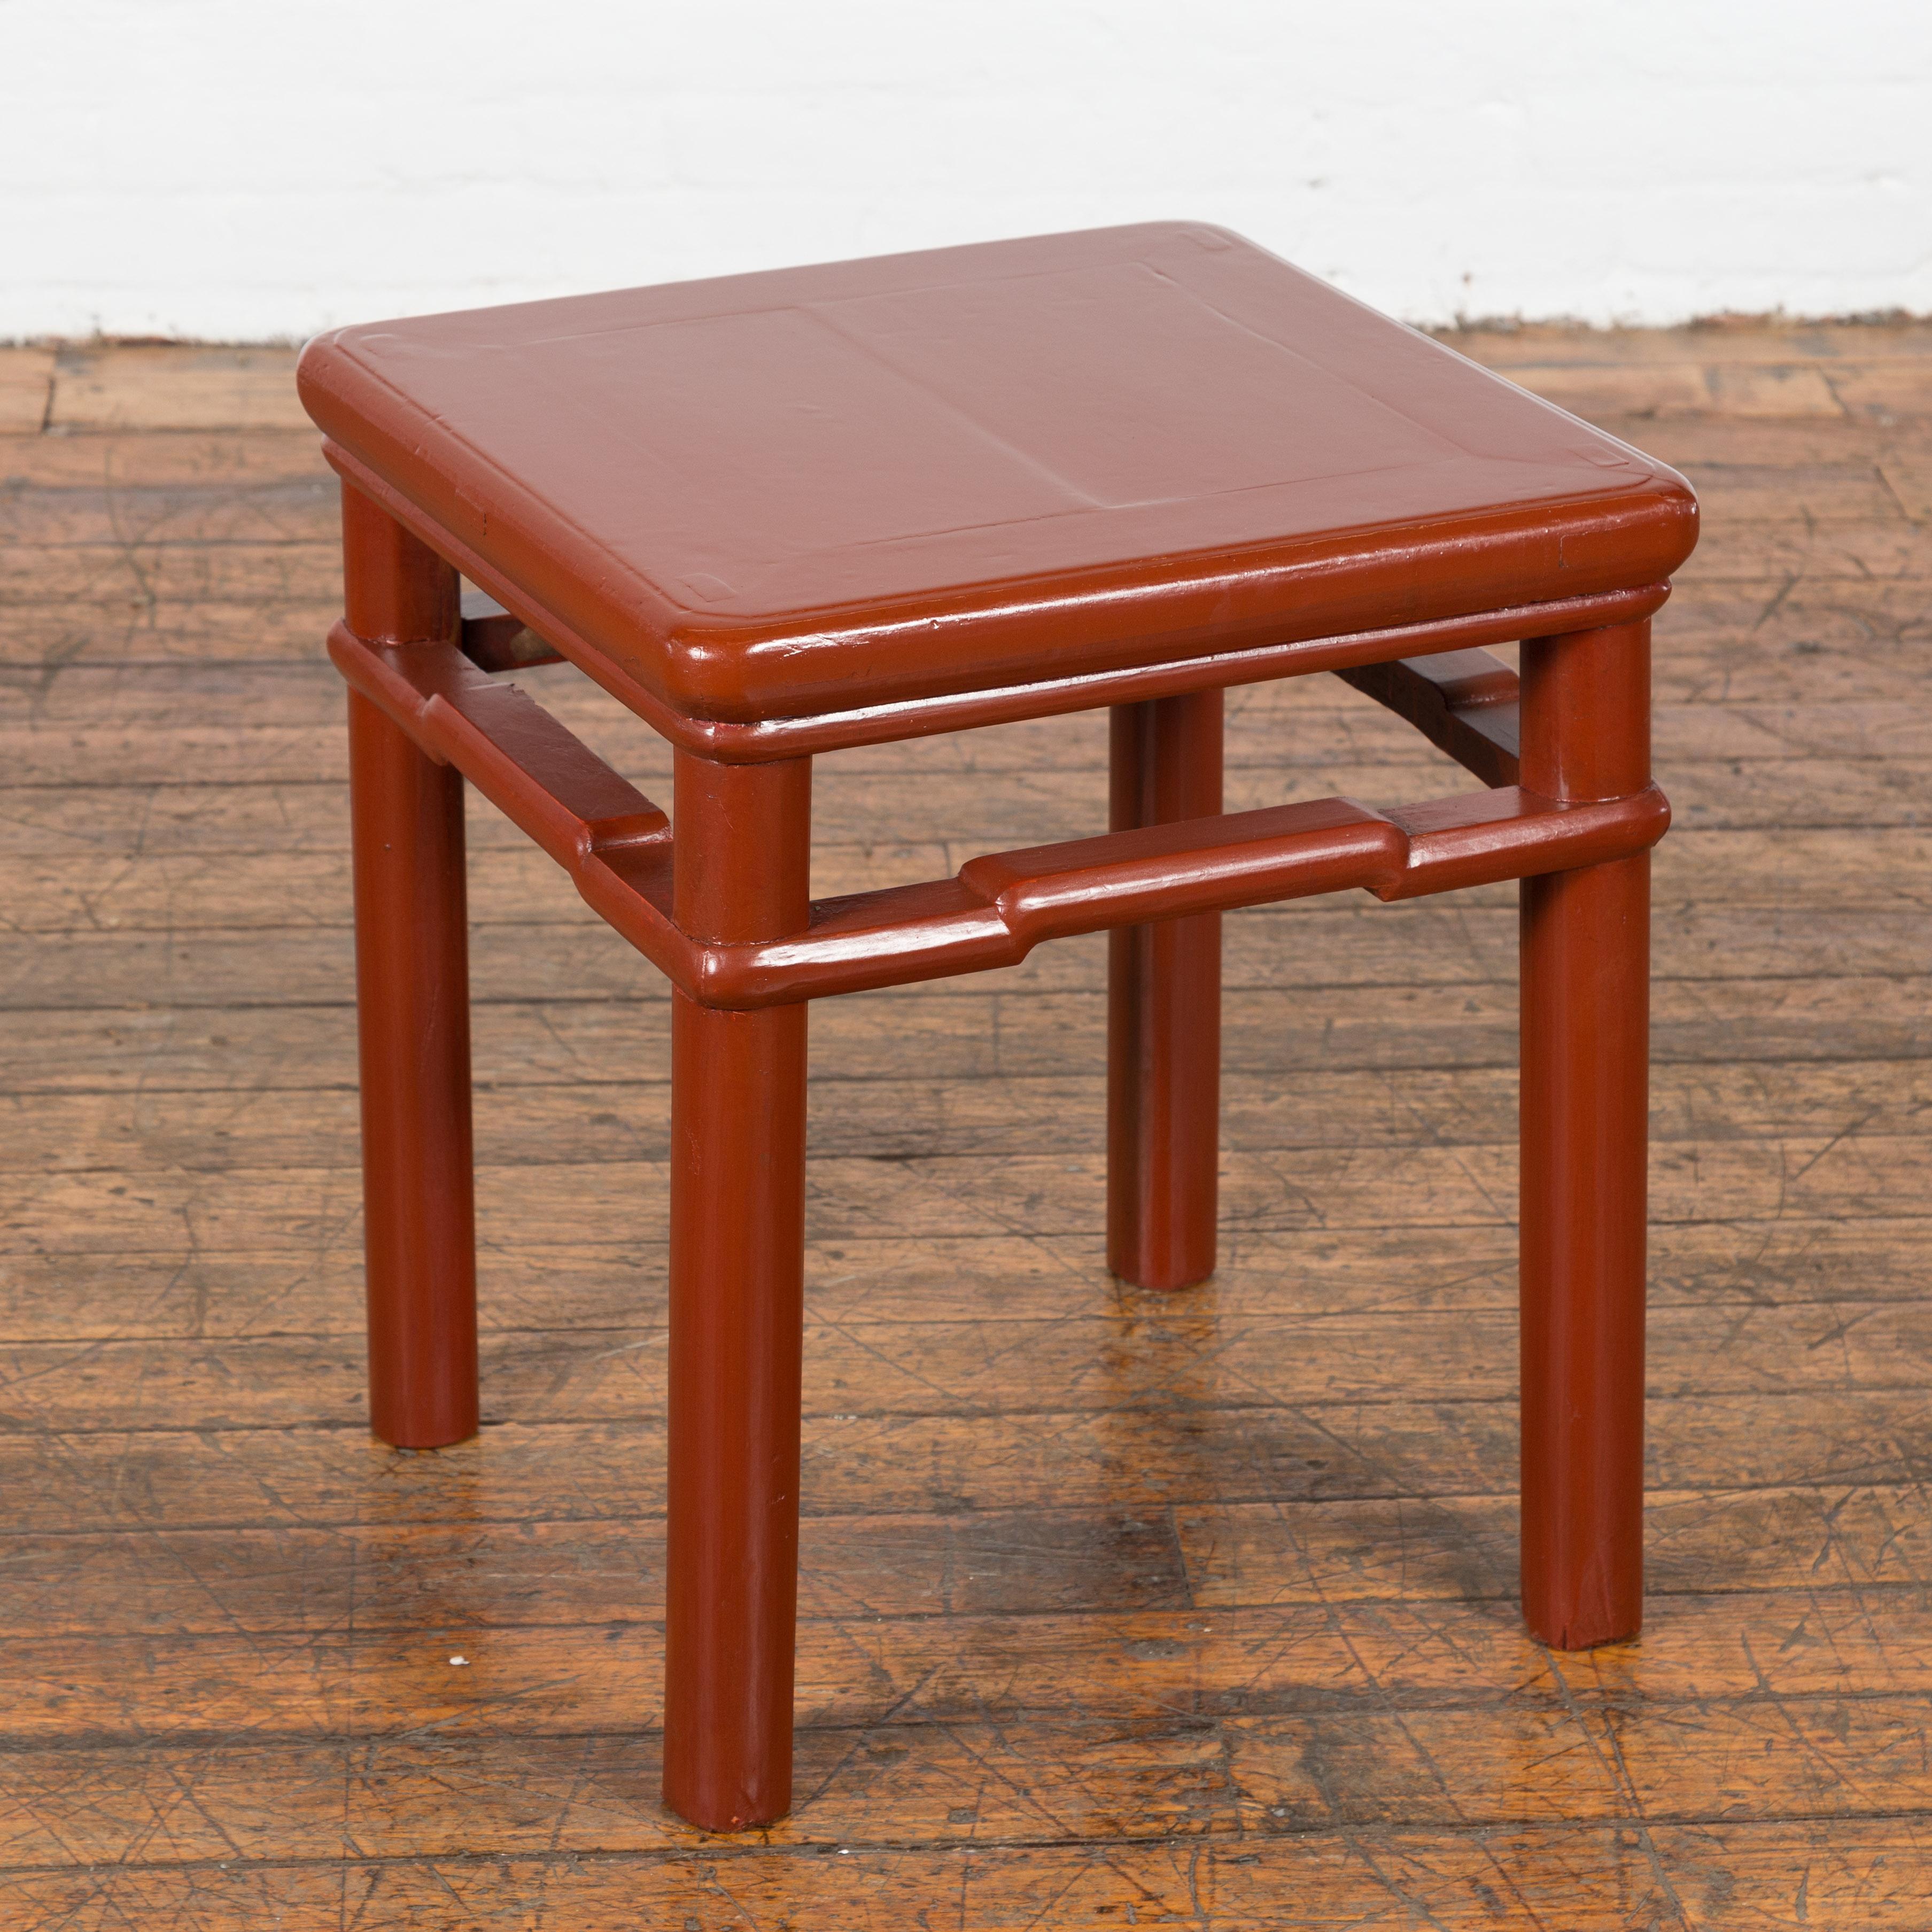 A Chinese late Qing Dynasty period side table or stool from the early 20th century, with red lacquer, humpback stretchers and straight cylindrical legs. This Chinese late Qing Dynasty period side table or stool from the early 20th century is a